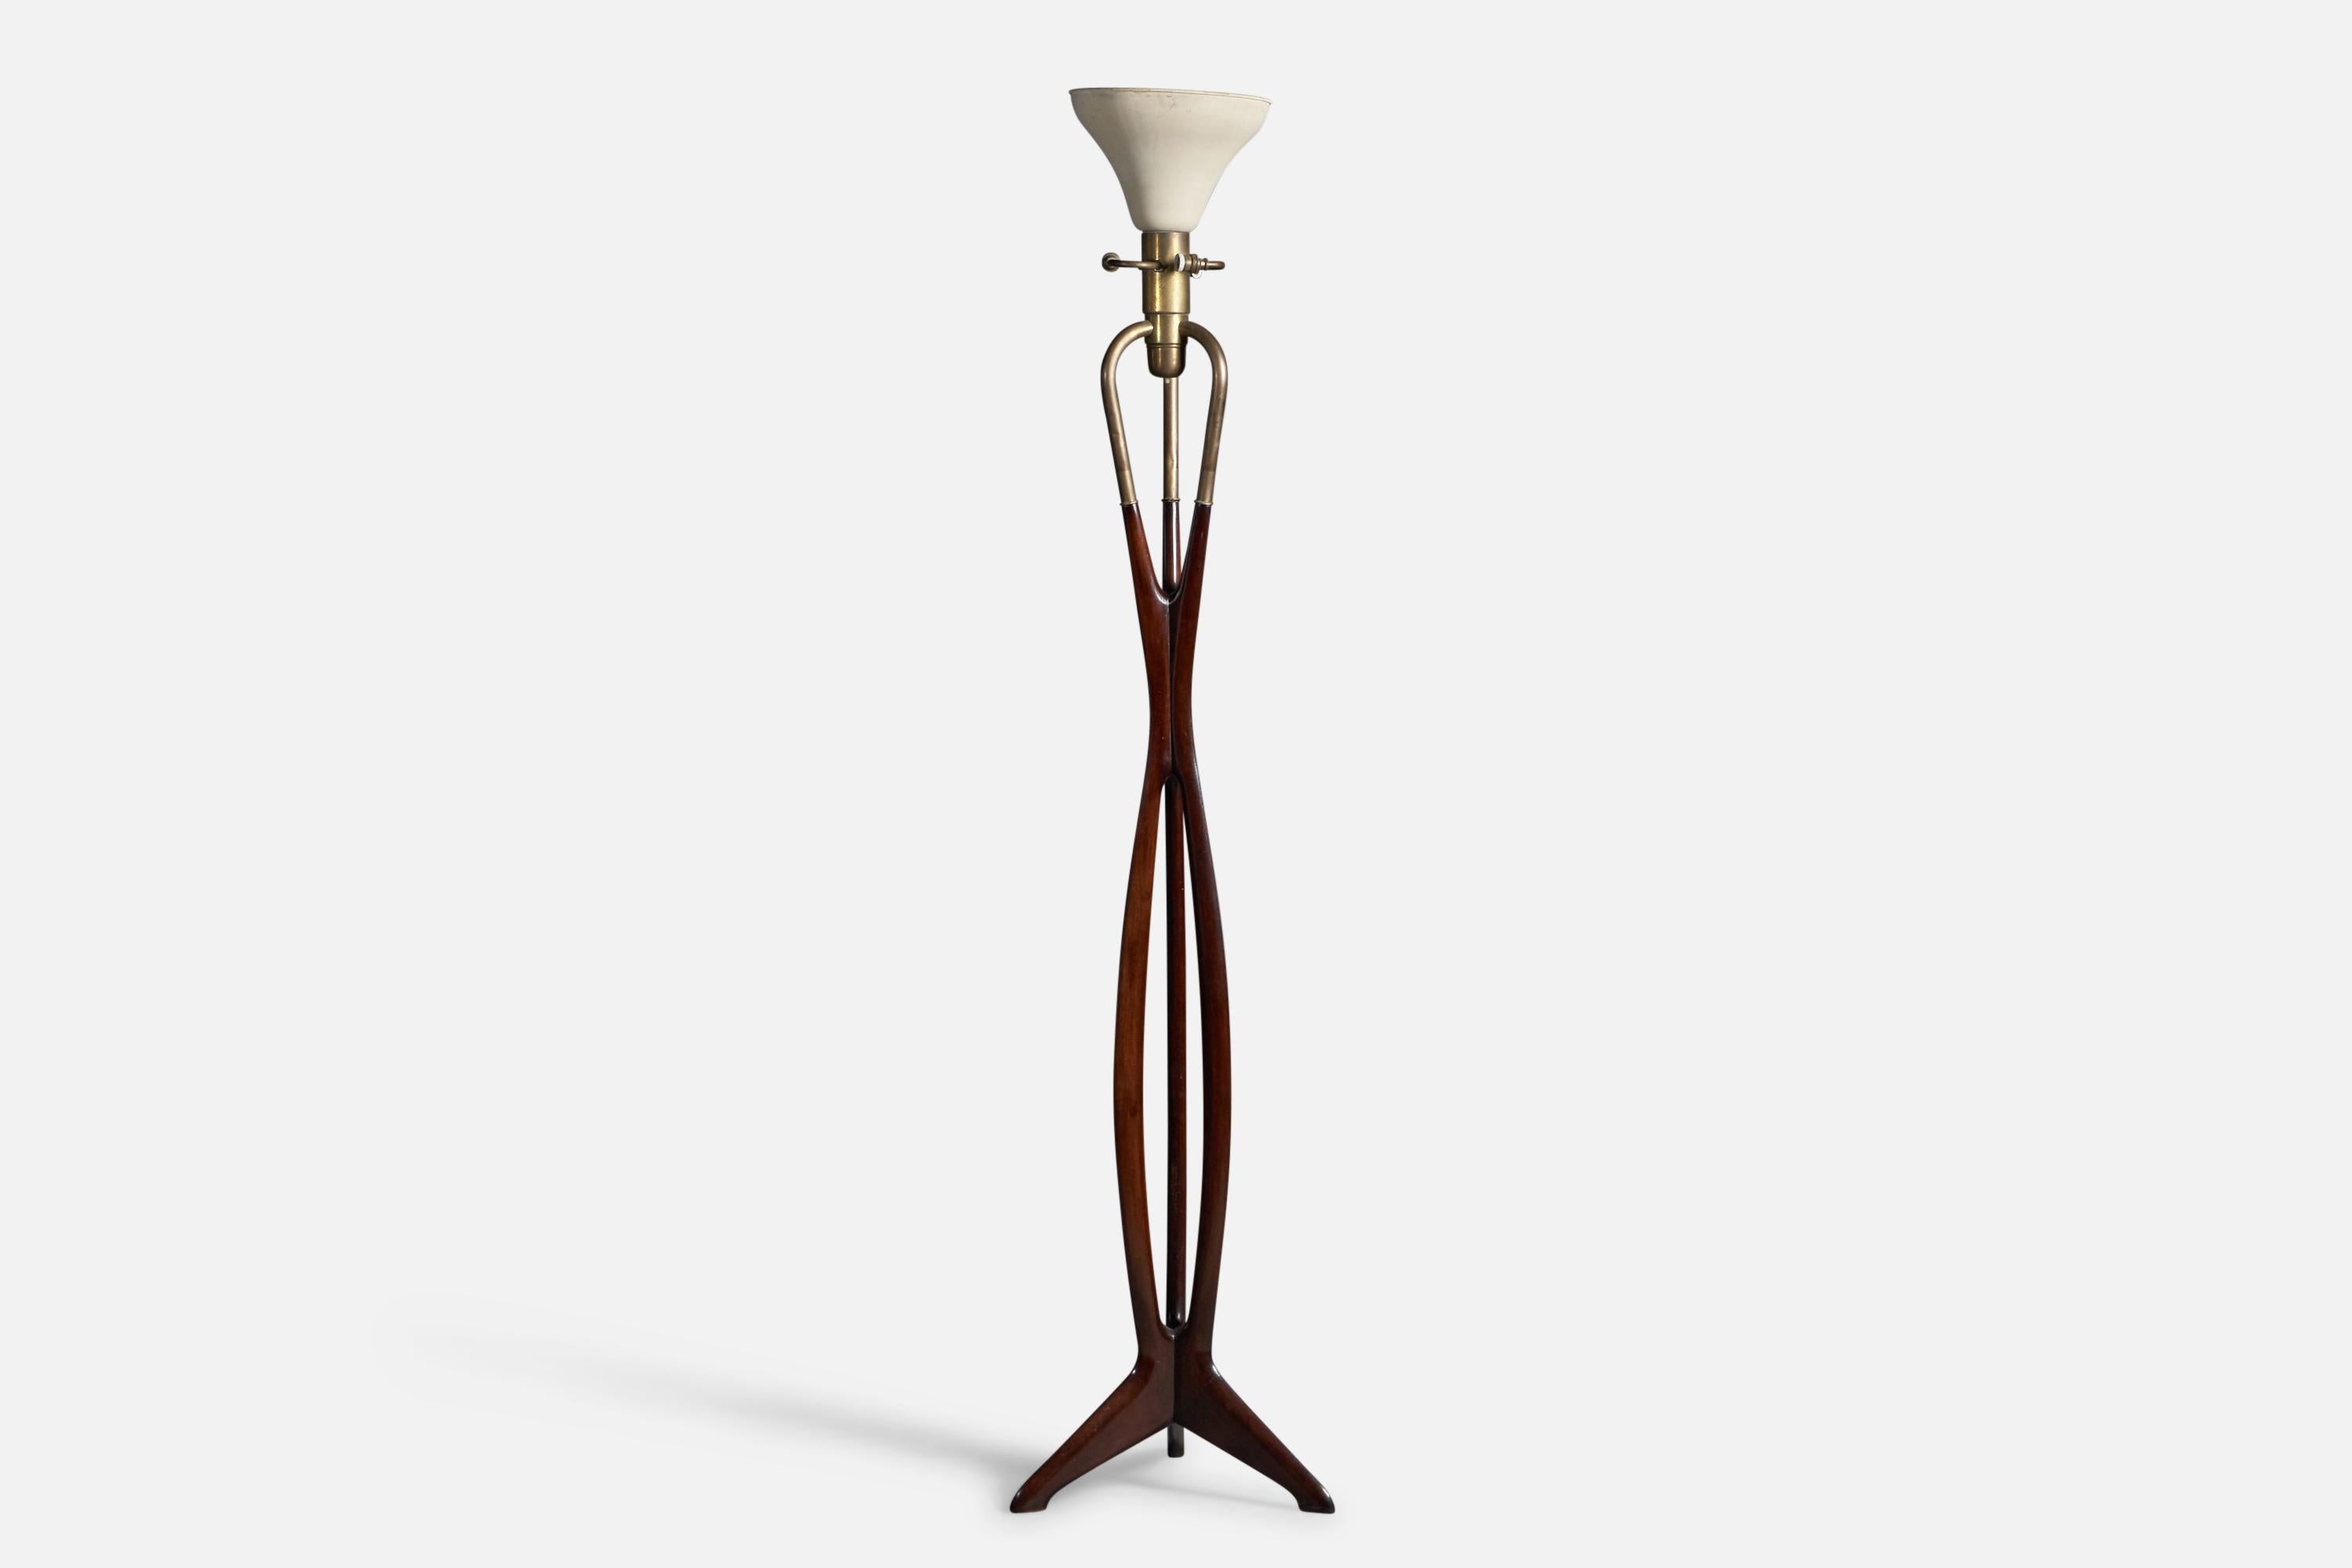 A walnut, brass and white fabric floor lamp, designed and produced by Cesare Lacca, Italy, 1950s

Dimensions of Lamp (inches): 68.6